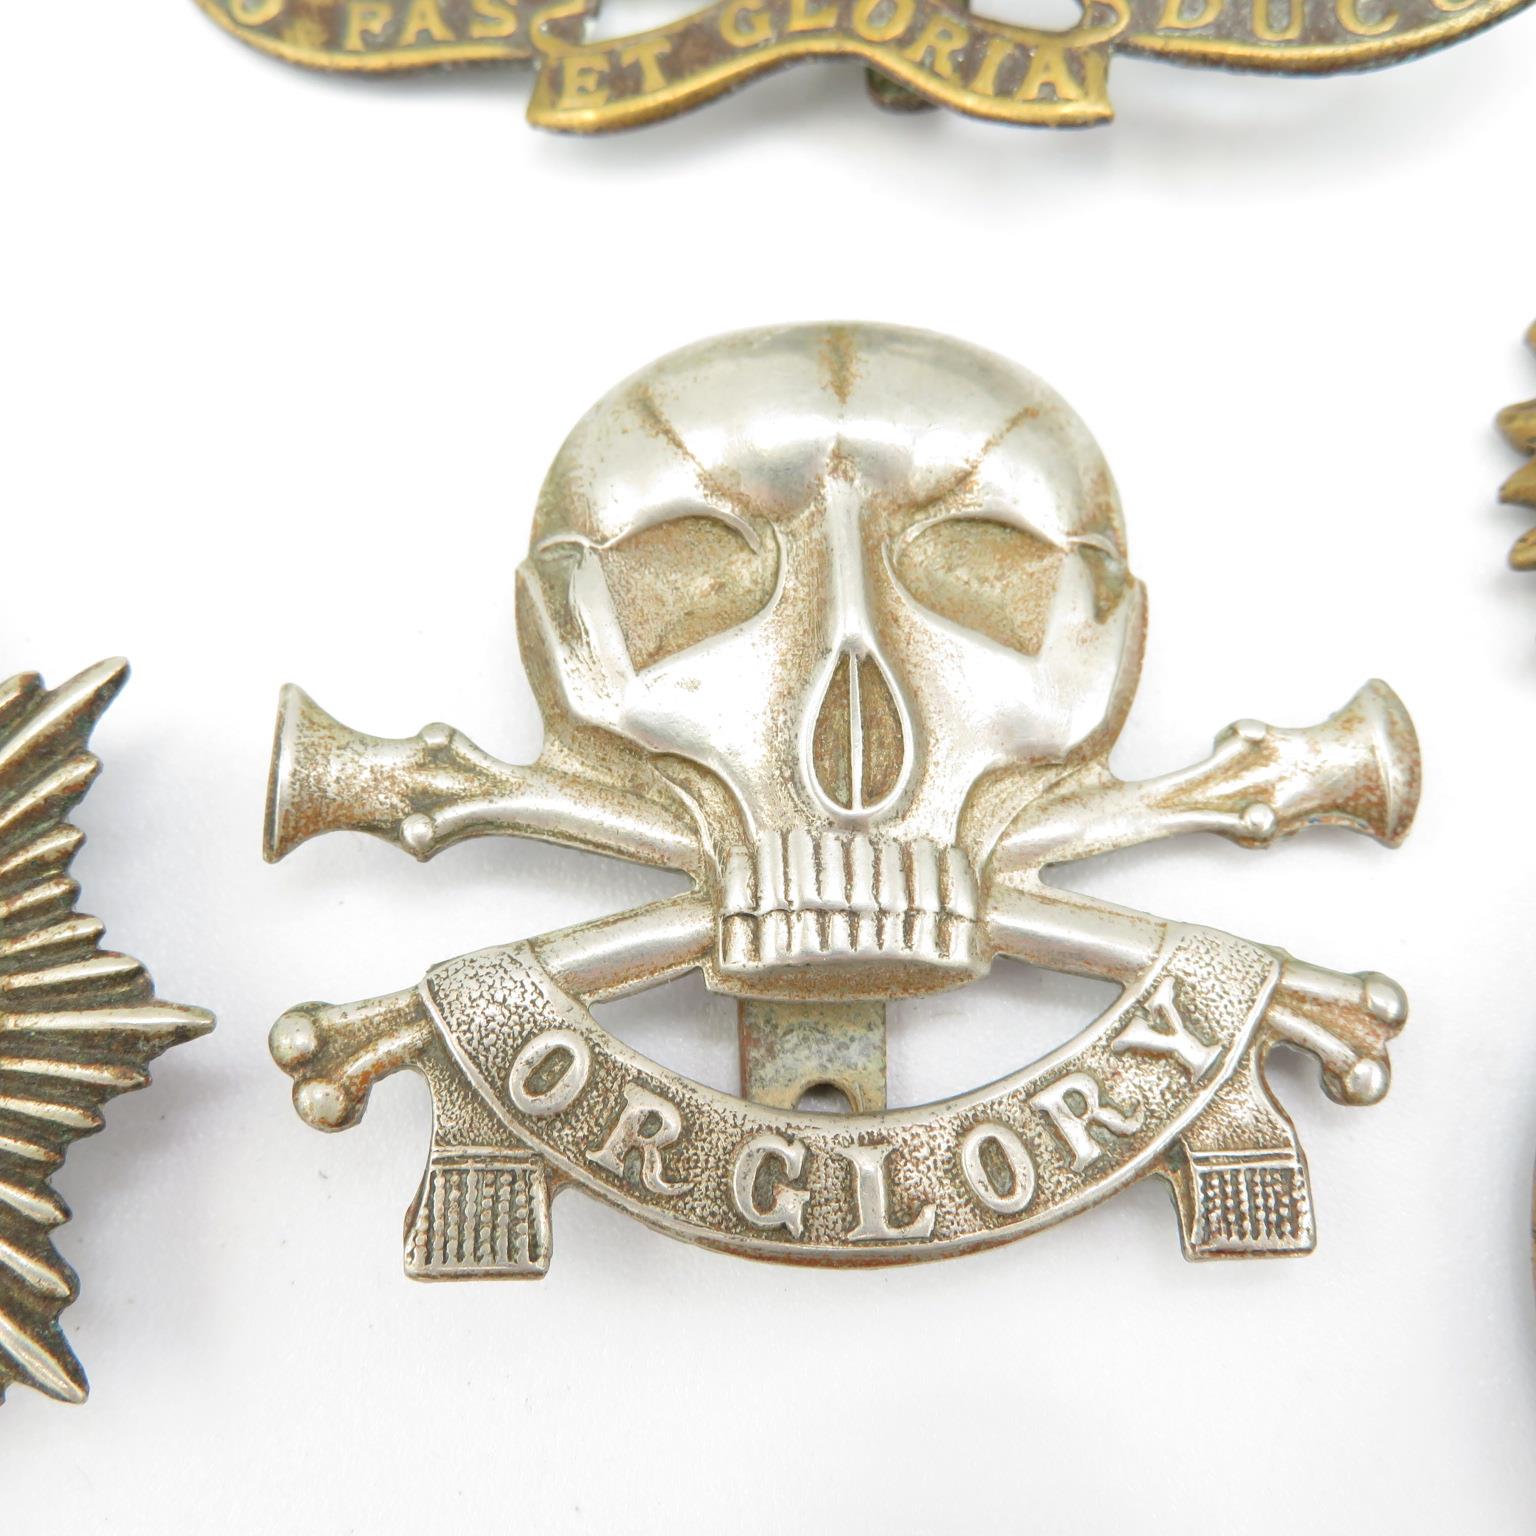 18x Military cap badges including Royal Scots Fusiliers and Lancers etc. - - Image 8 of 19